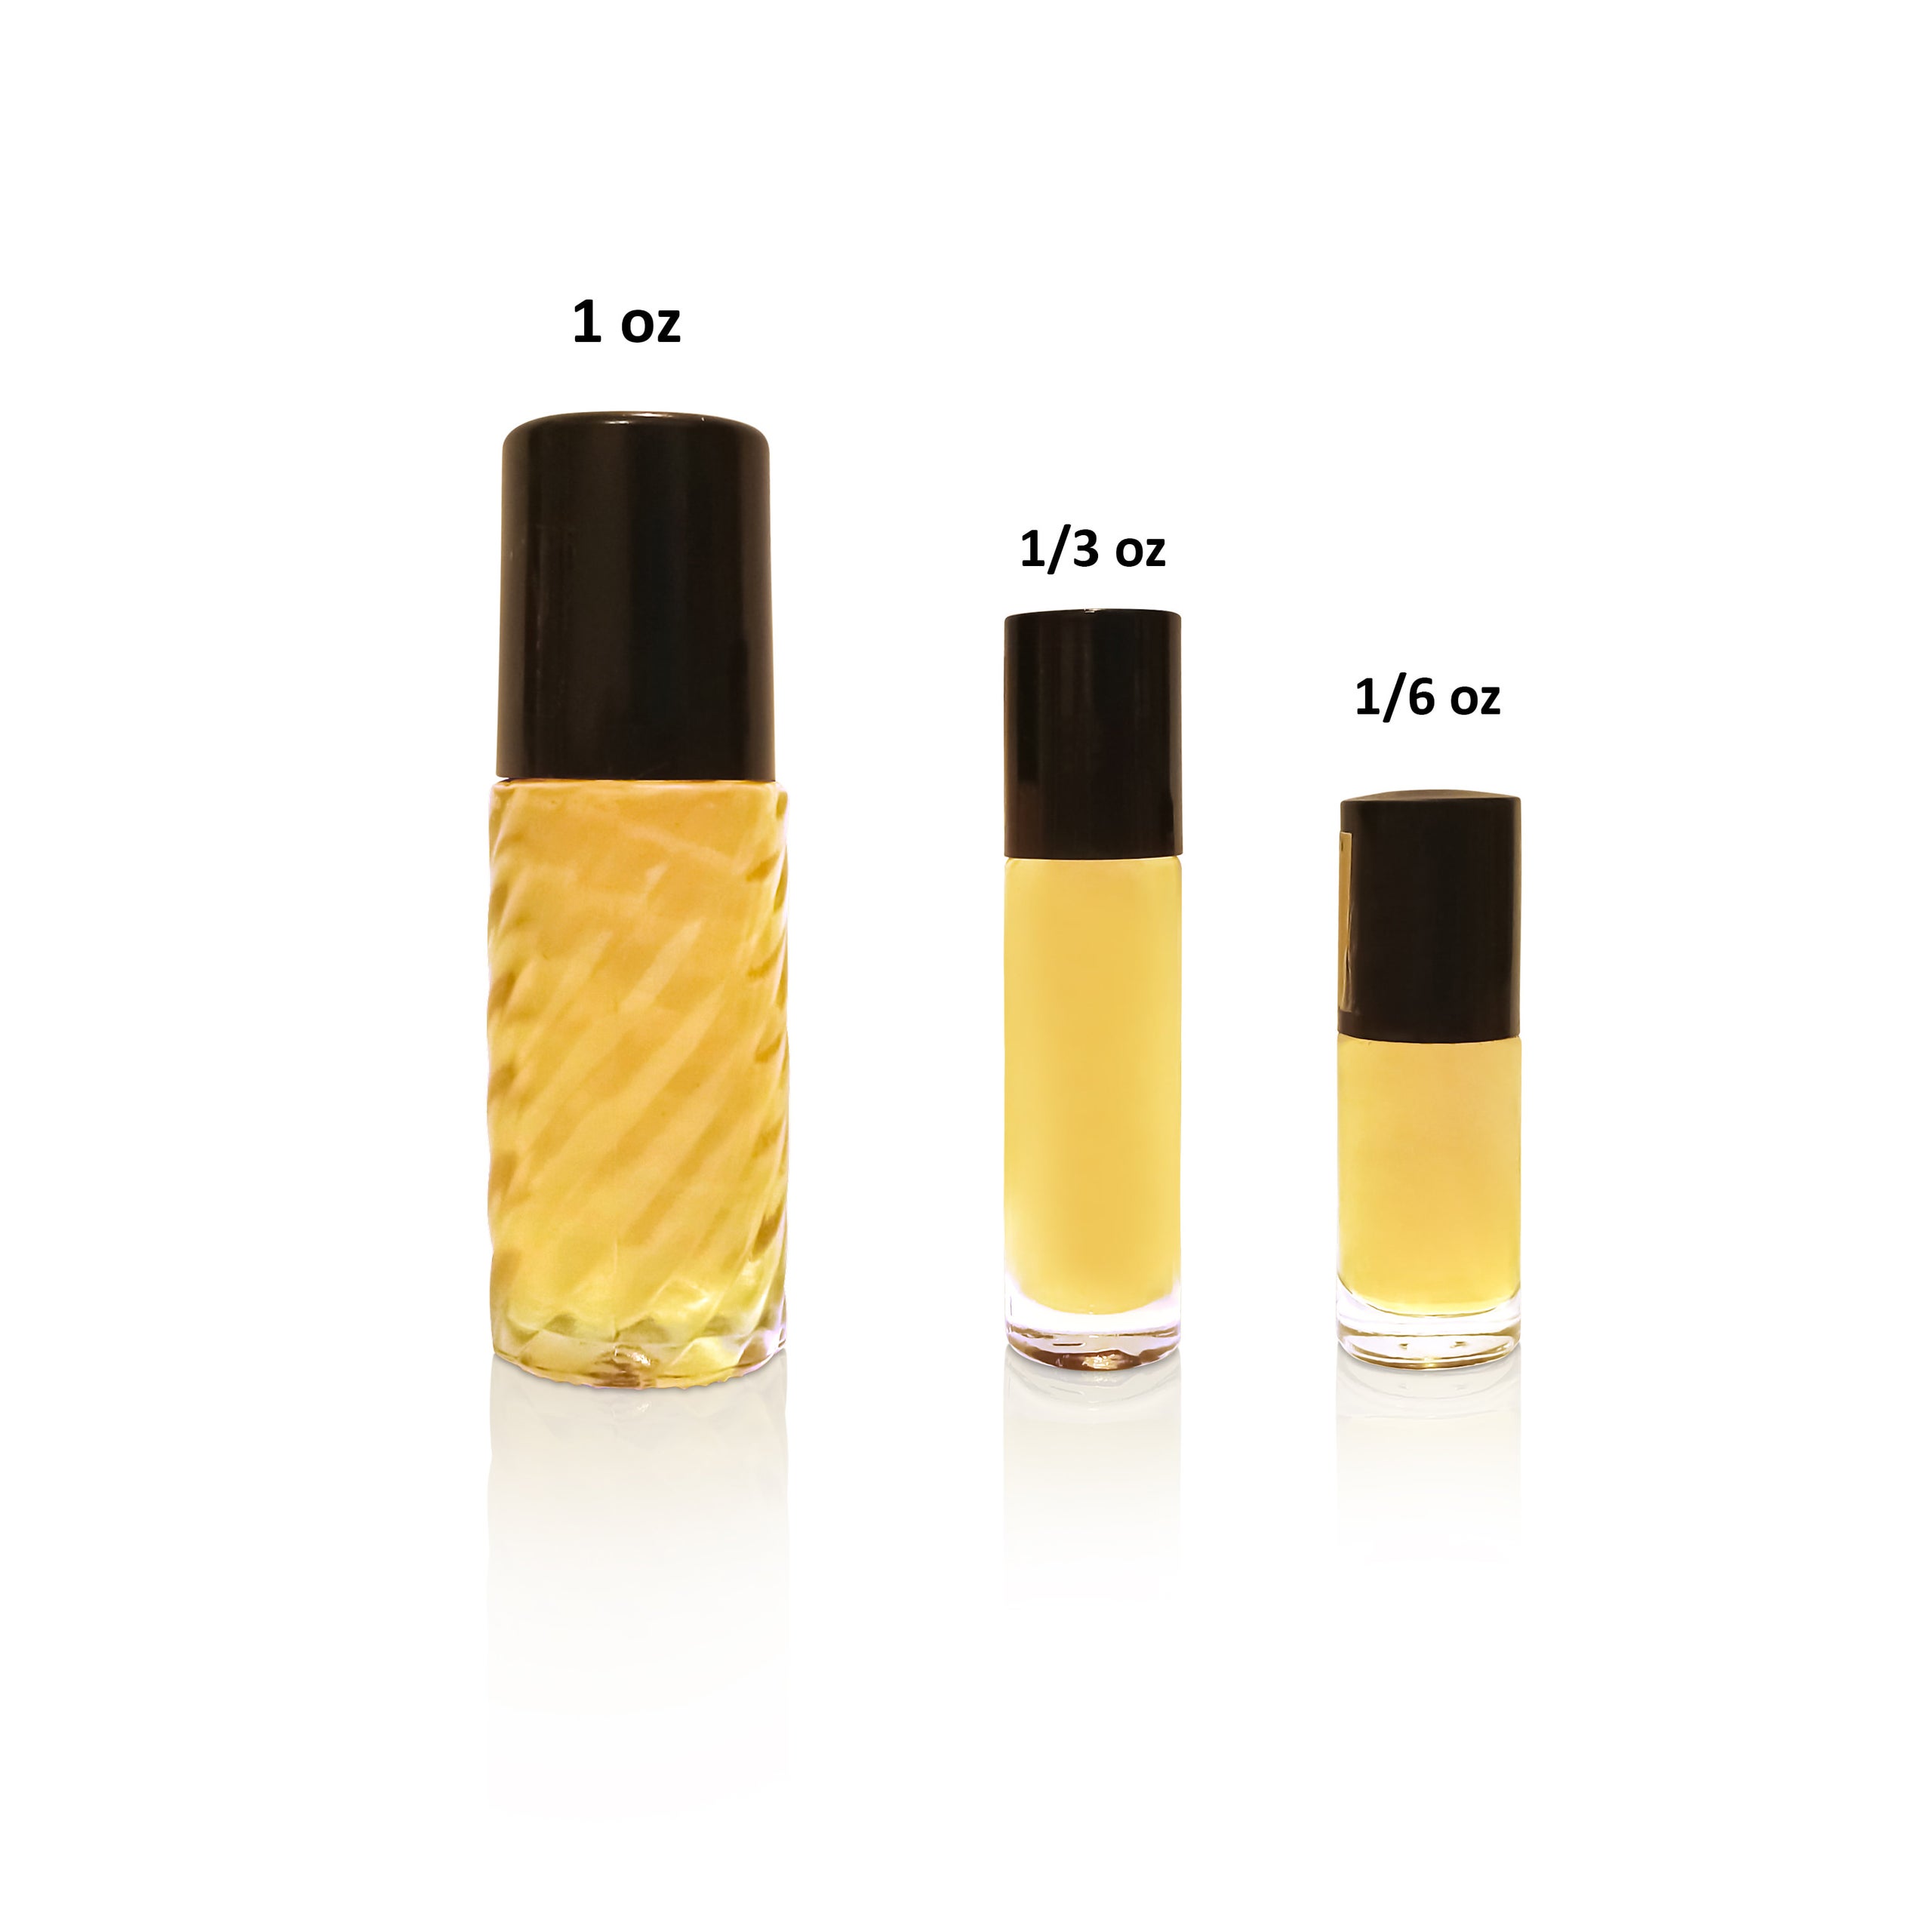 CoCo Mademoiselle Type Body Oil-Luxury Perfumed Oil-Alcohol Free